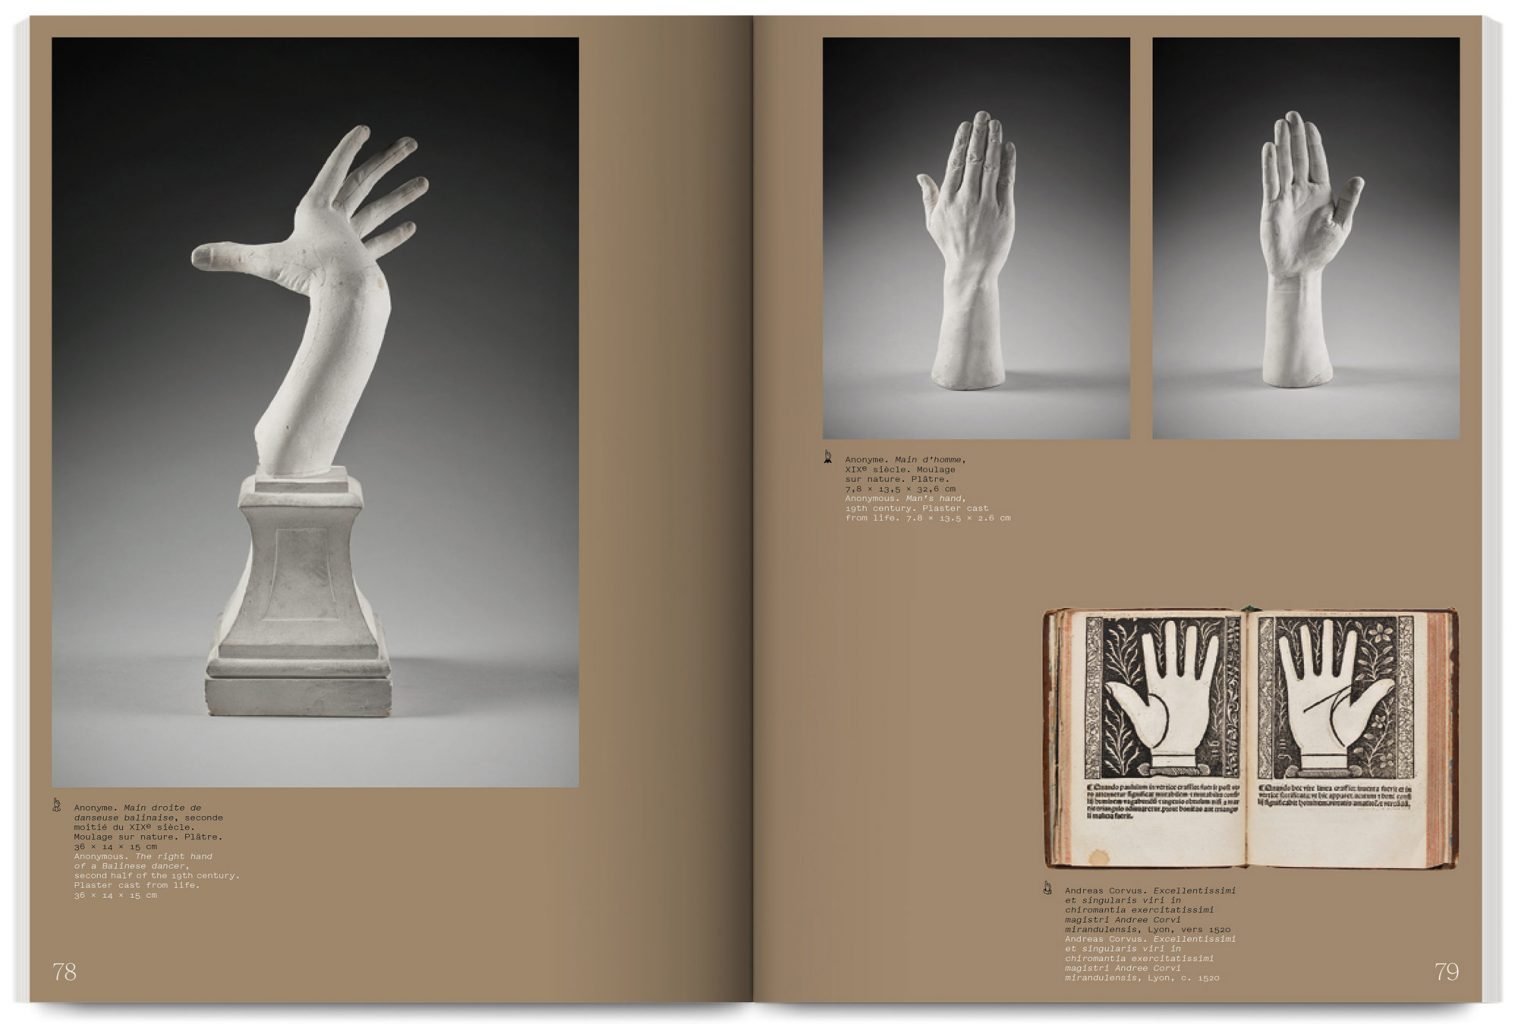 Exhibition catalogue L’esprit commence et finit avec les mains at the Palais de Tokyo published by Flammarion, designed by In the shade of a tree studio, founded by Sophie Demay and Maël Fournier Comte.